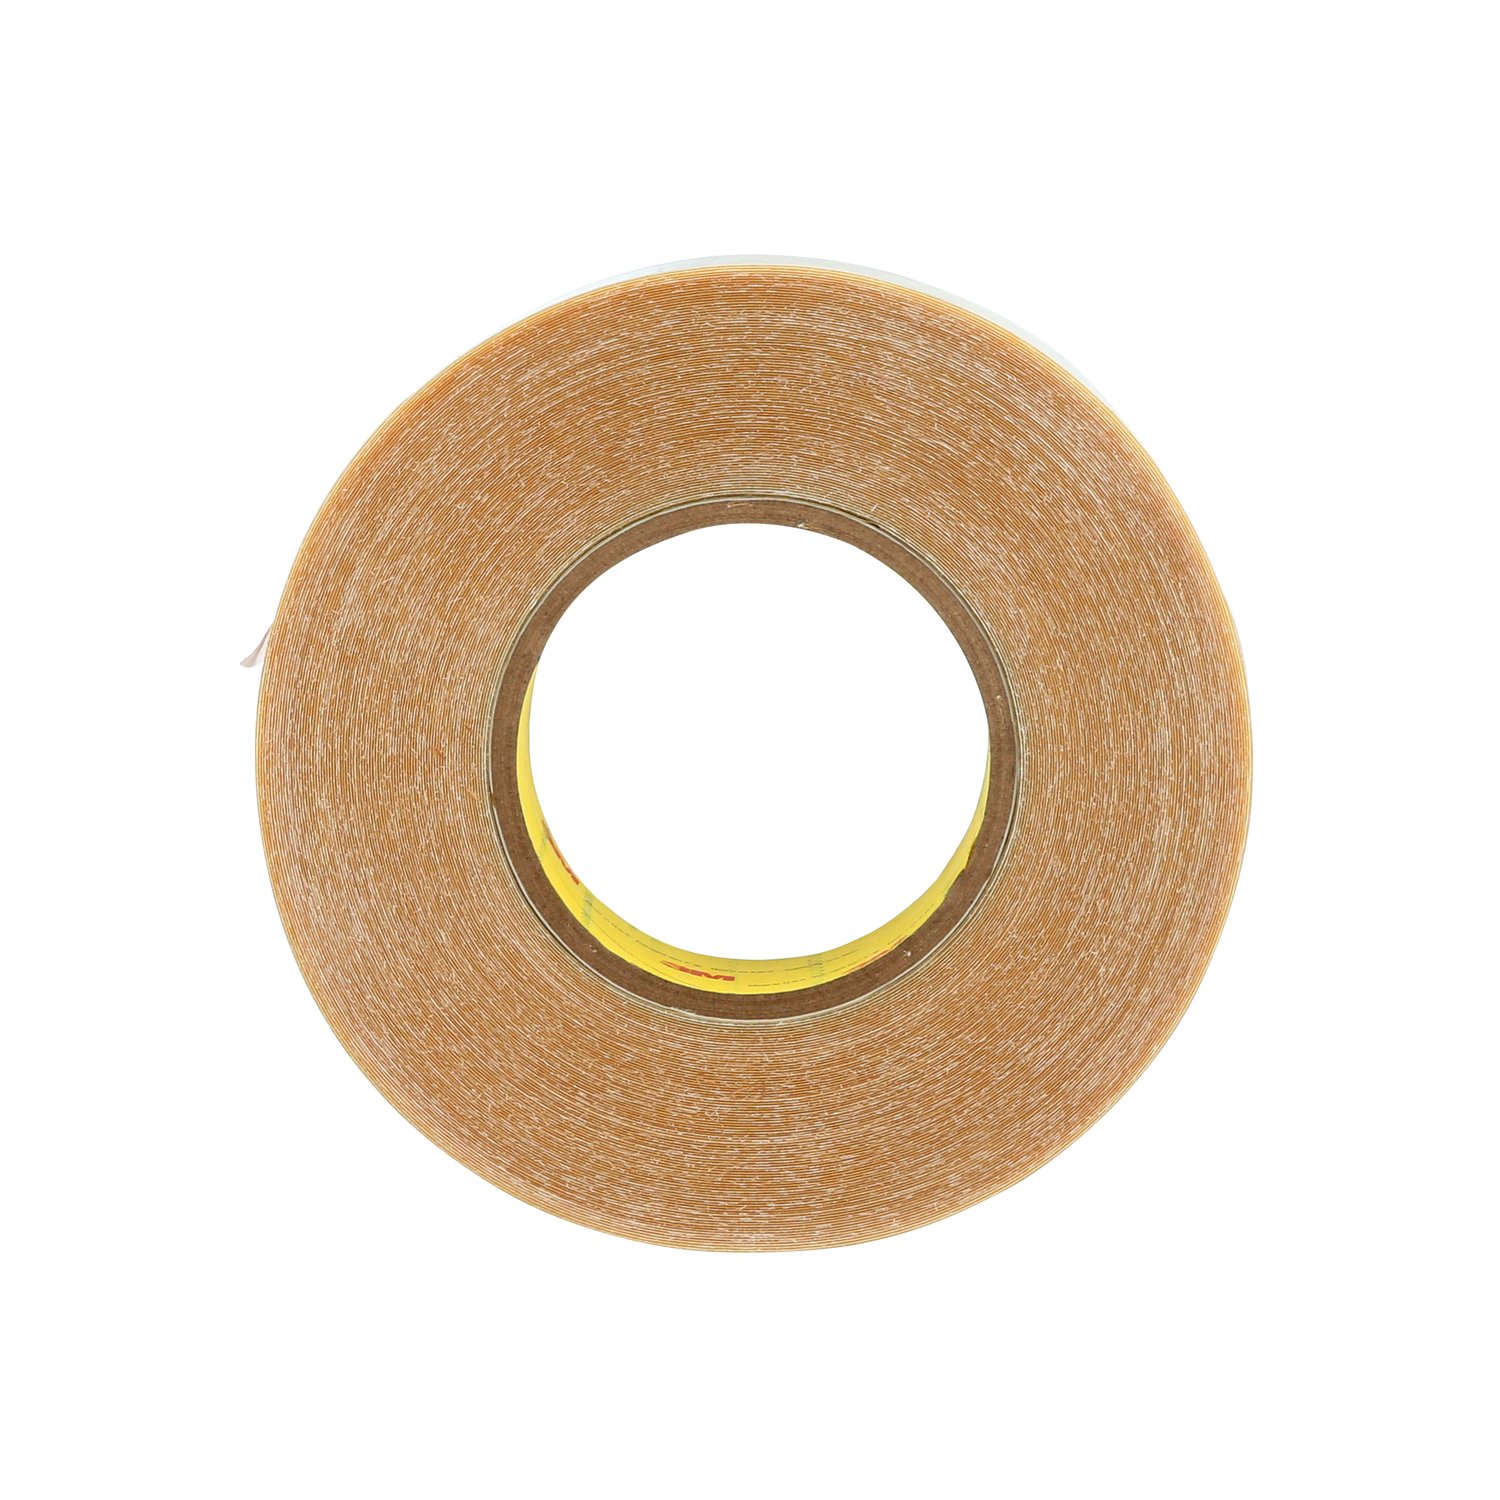 7000048545 - 3M Polyurethane Protective Tape 8560, Transparent, Paper Liner, 2 in x
36 yd, 6 Rolls/Case